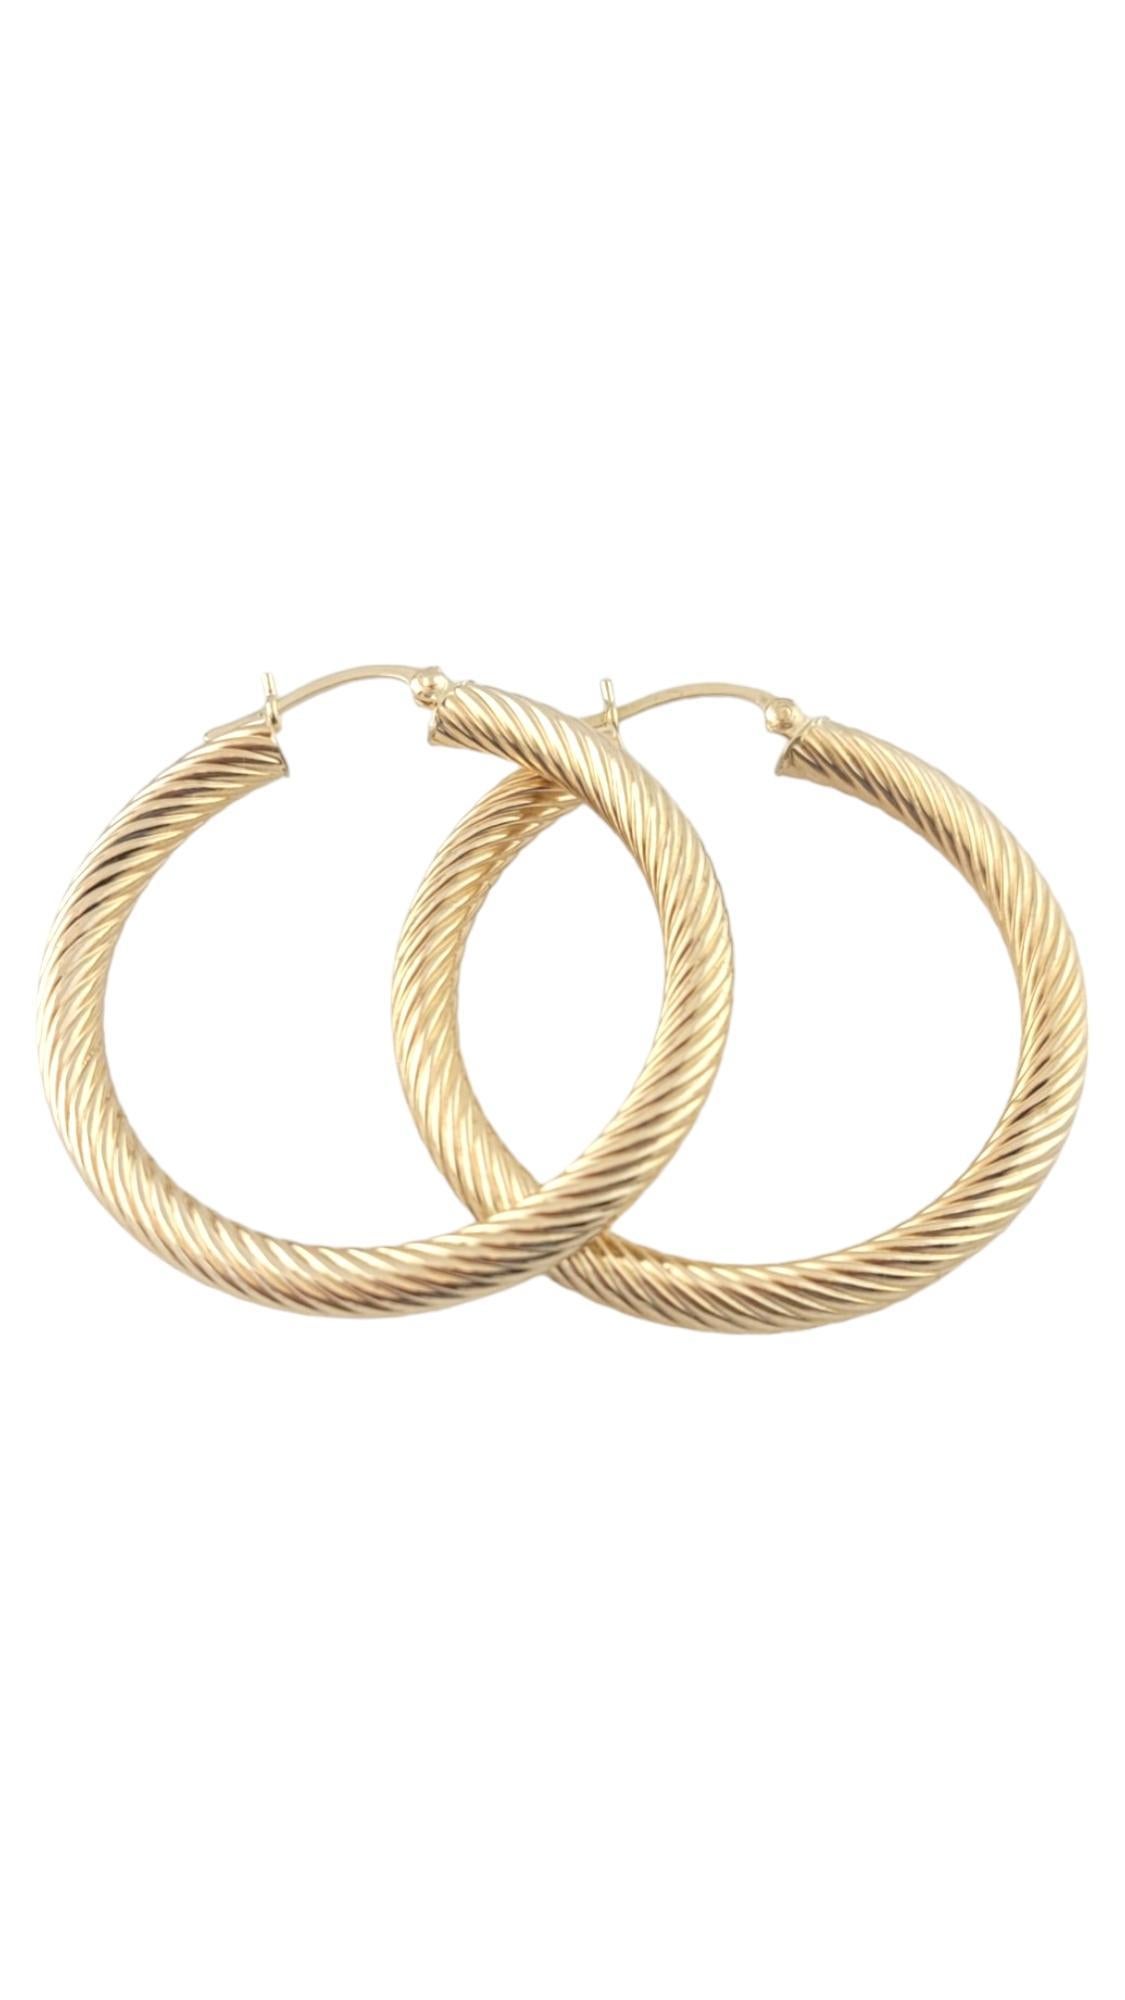 Vintage 14K Yellow Gold Ribbed Hoop Earrings

This gorgeous set of 14K yellow gold hoops have a beautiful, ribbed finish!

Diameter: 38.93mm 
Width: 3.9mm

Weight: 2.5 dwt/ 4.0 g

Hallmark: 14K JCM

Very good condition, professionally